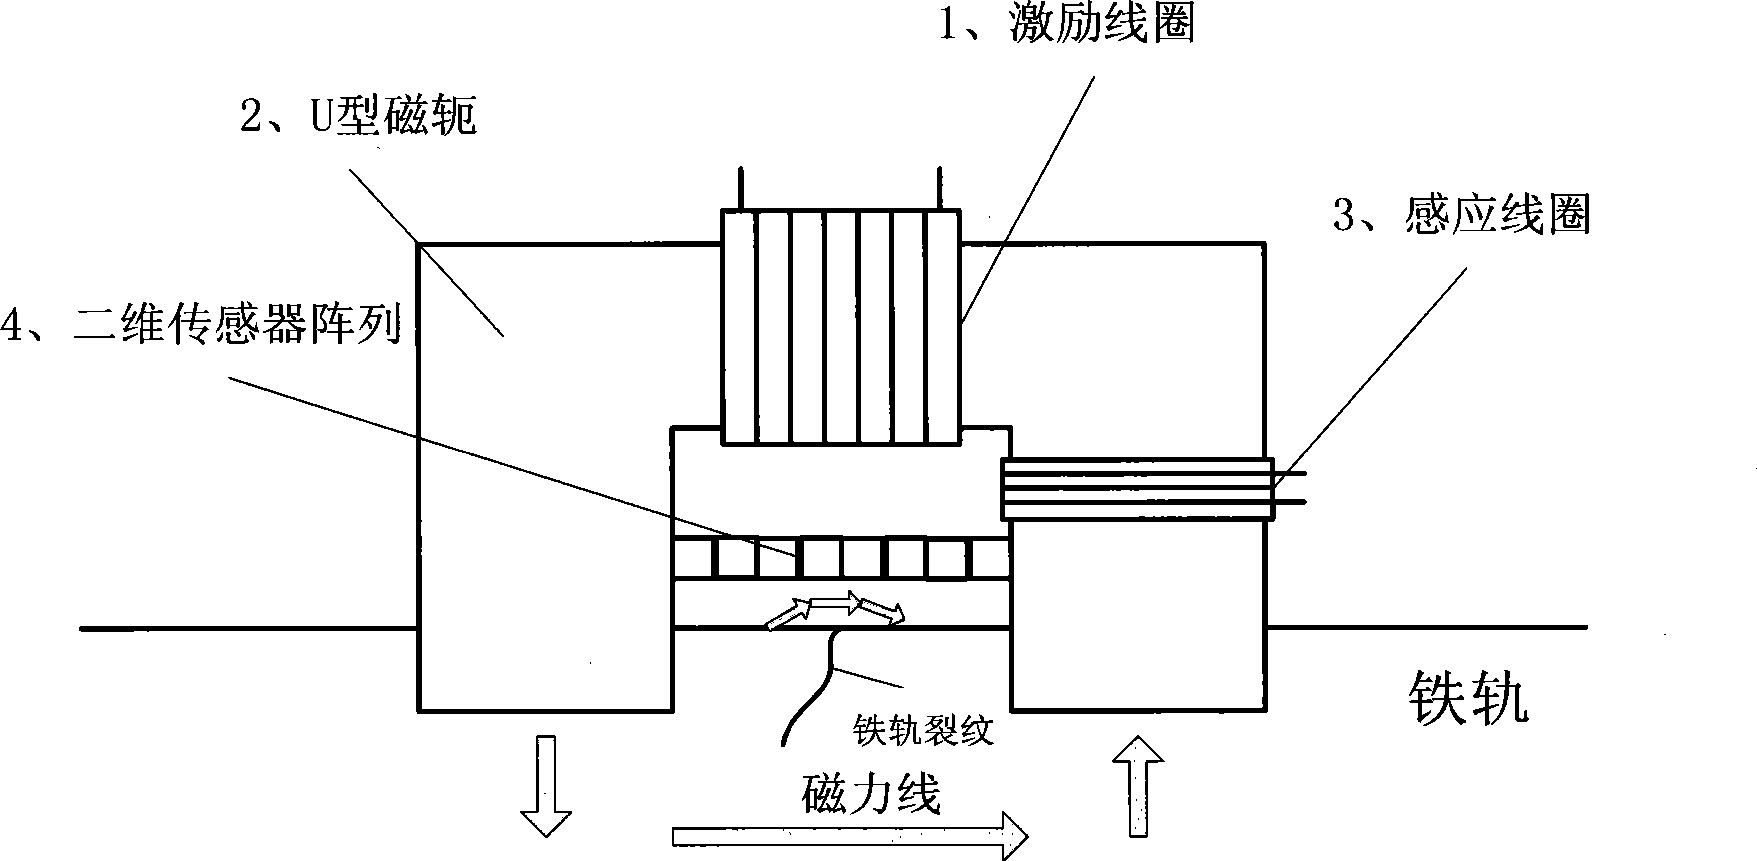 Pulse leakage railway rail detecting system and detecting method thereof